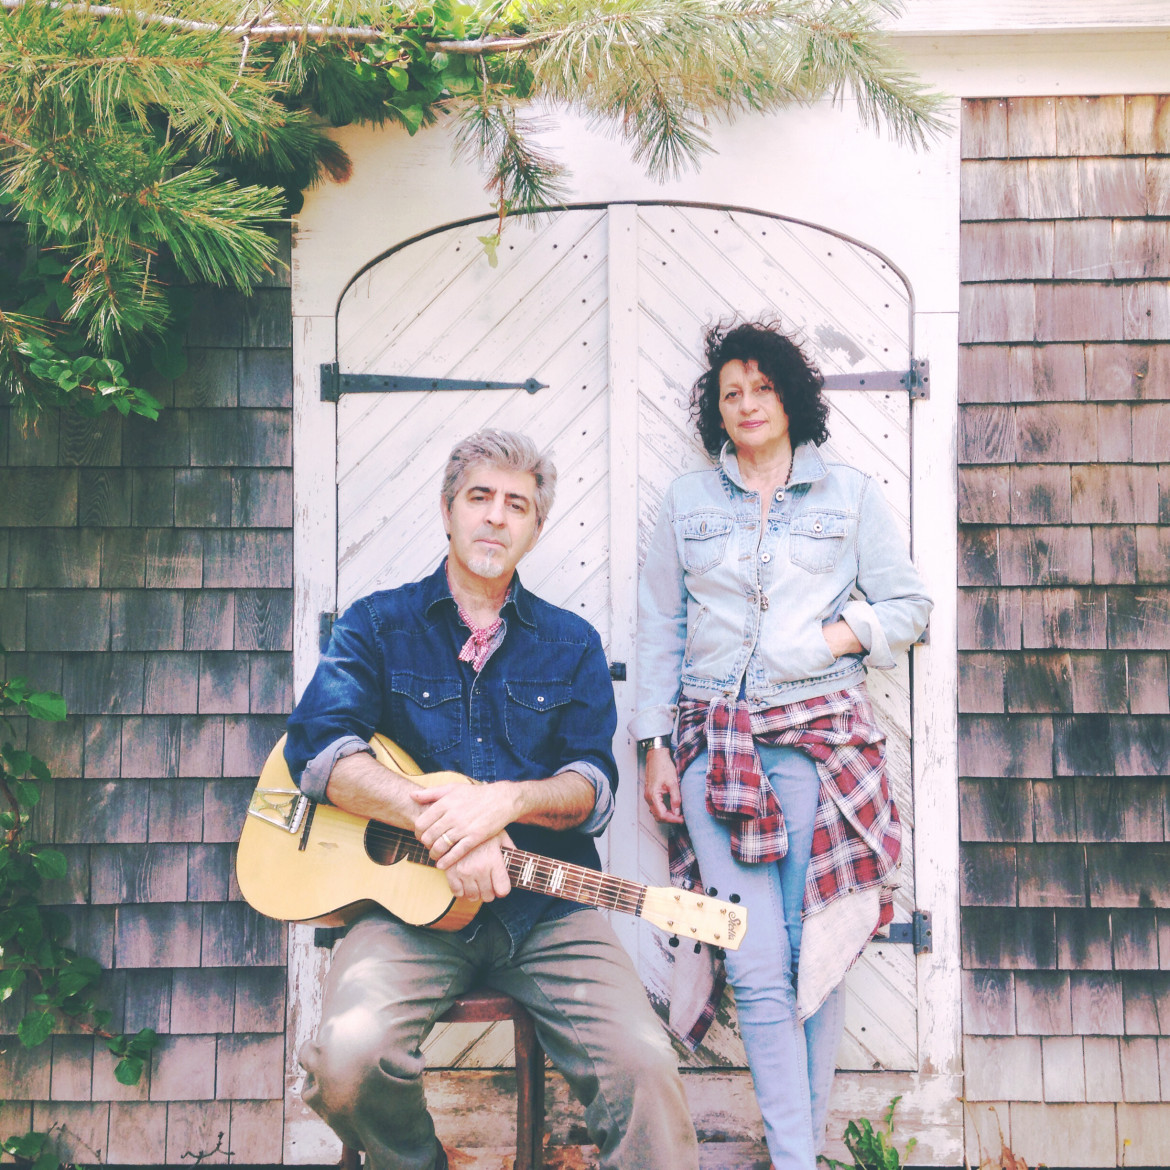 John and Rachel Nicholas will play at the first Tremedal Coffeehouse Concert on March 19.